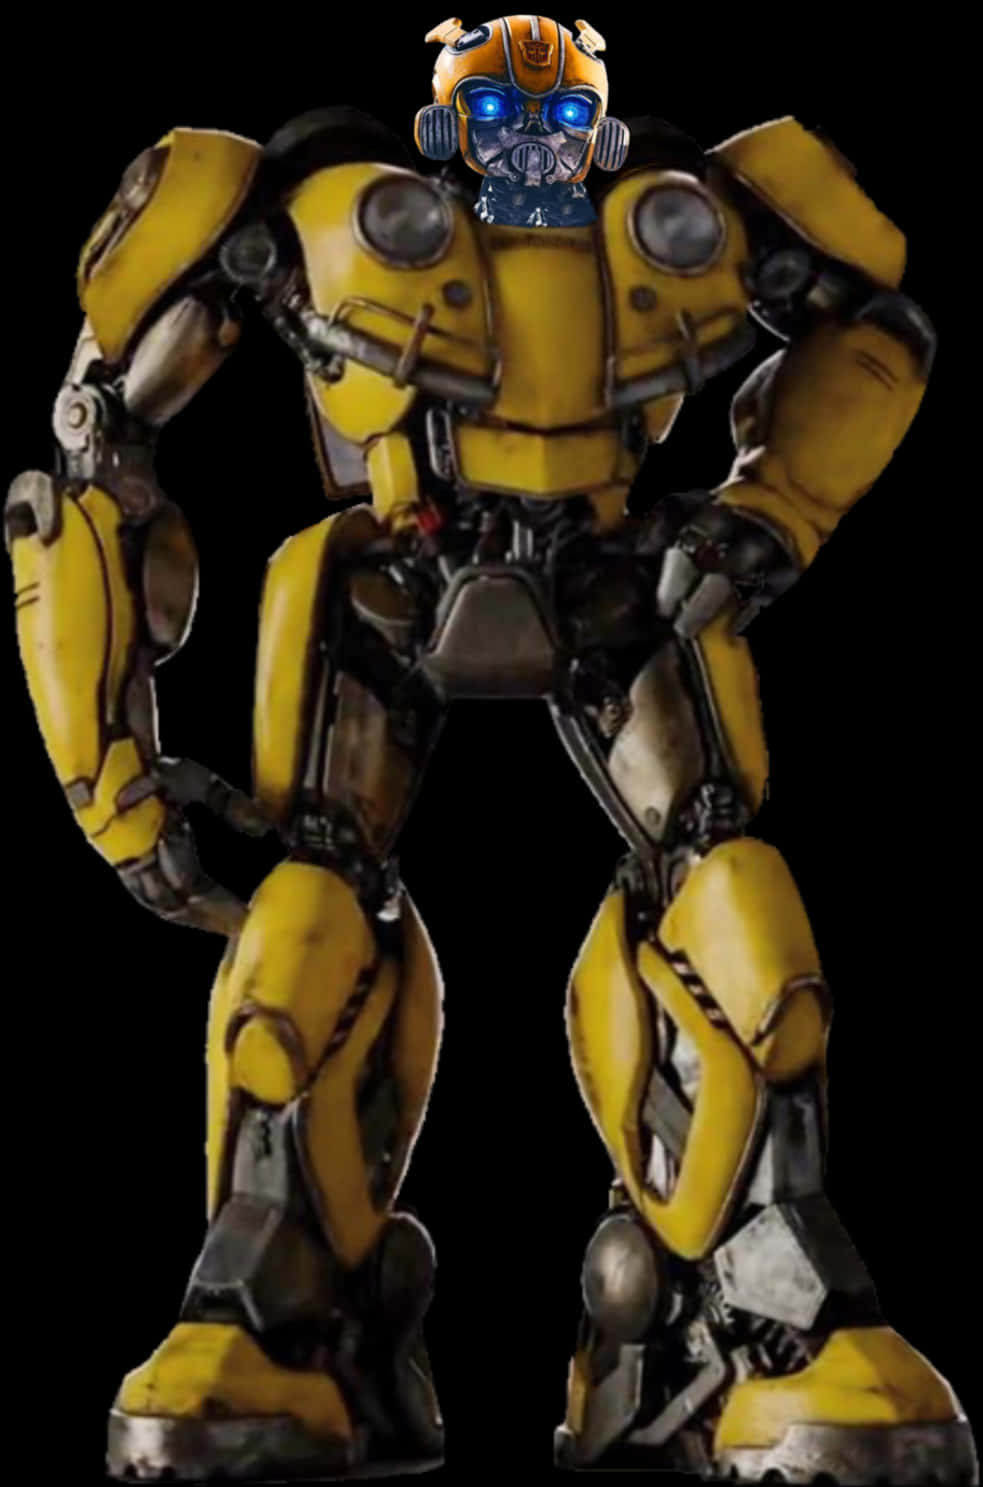 A Yellow Robot With Arms And Legs